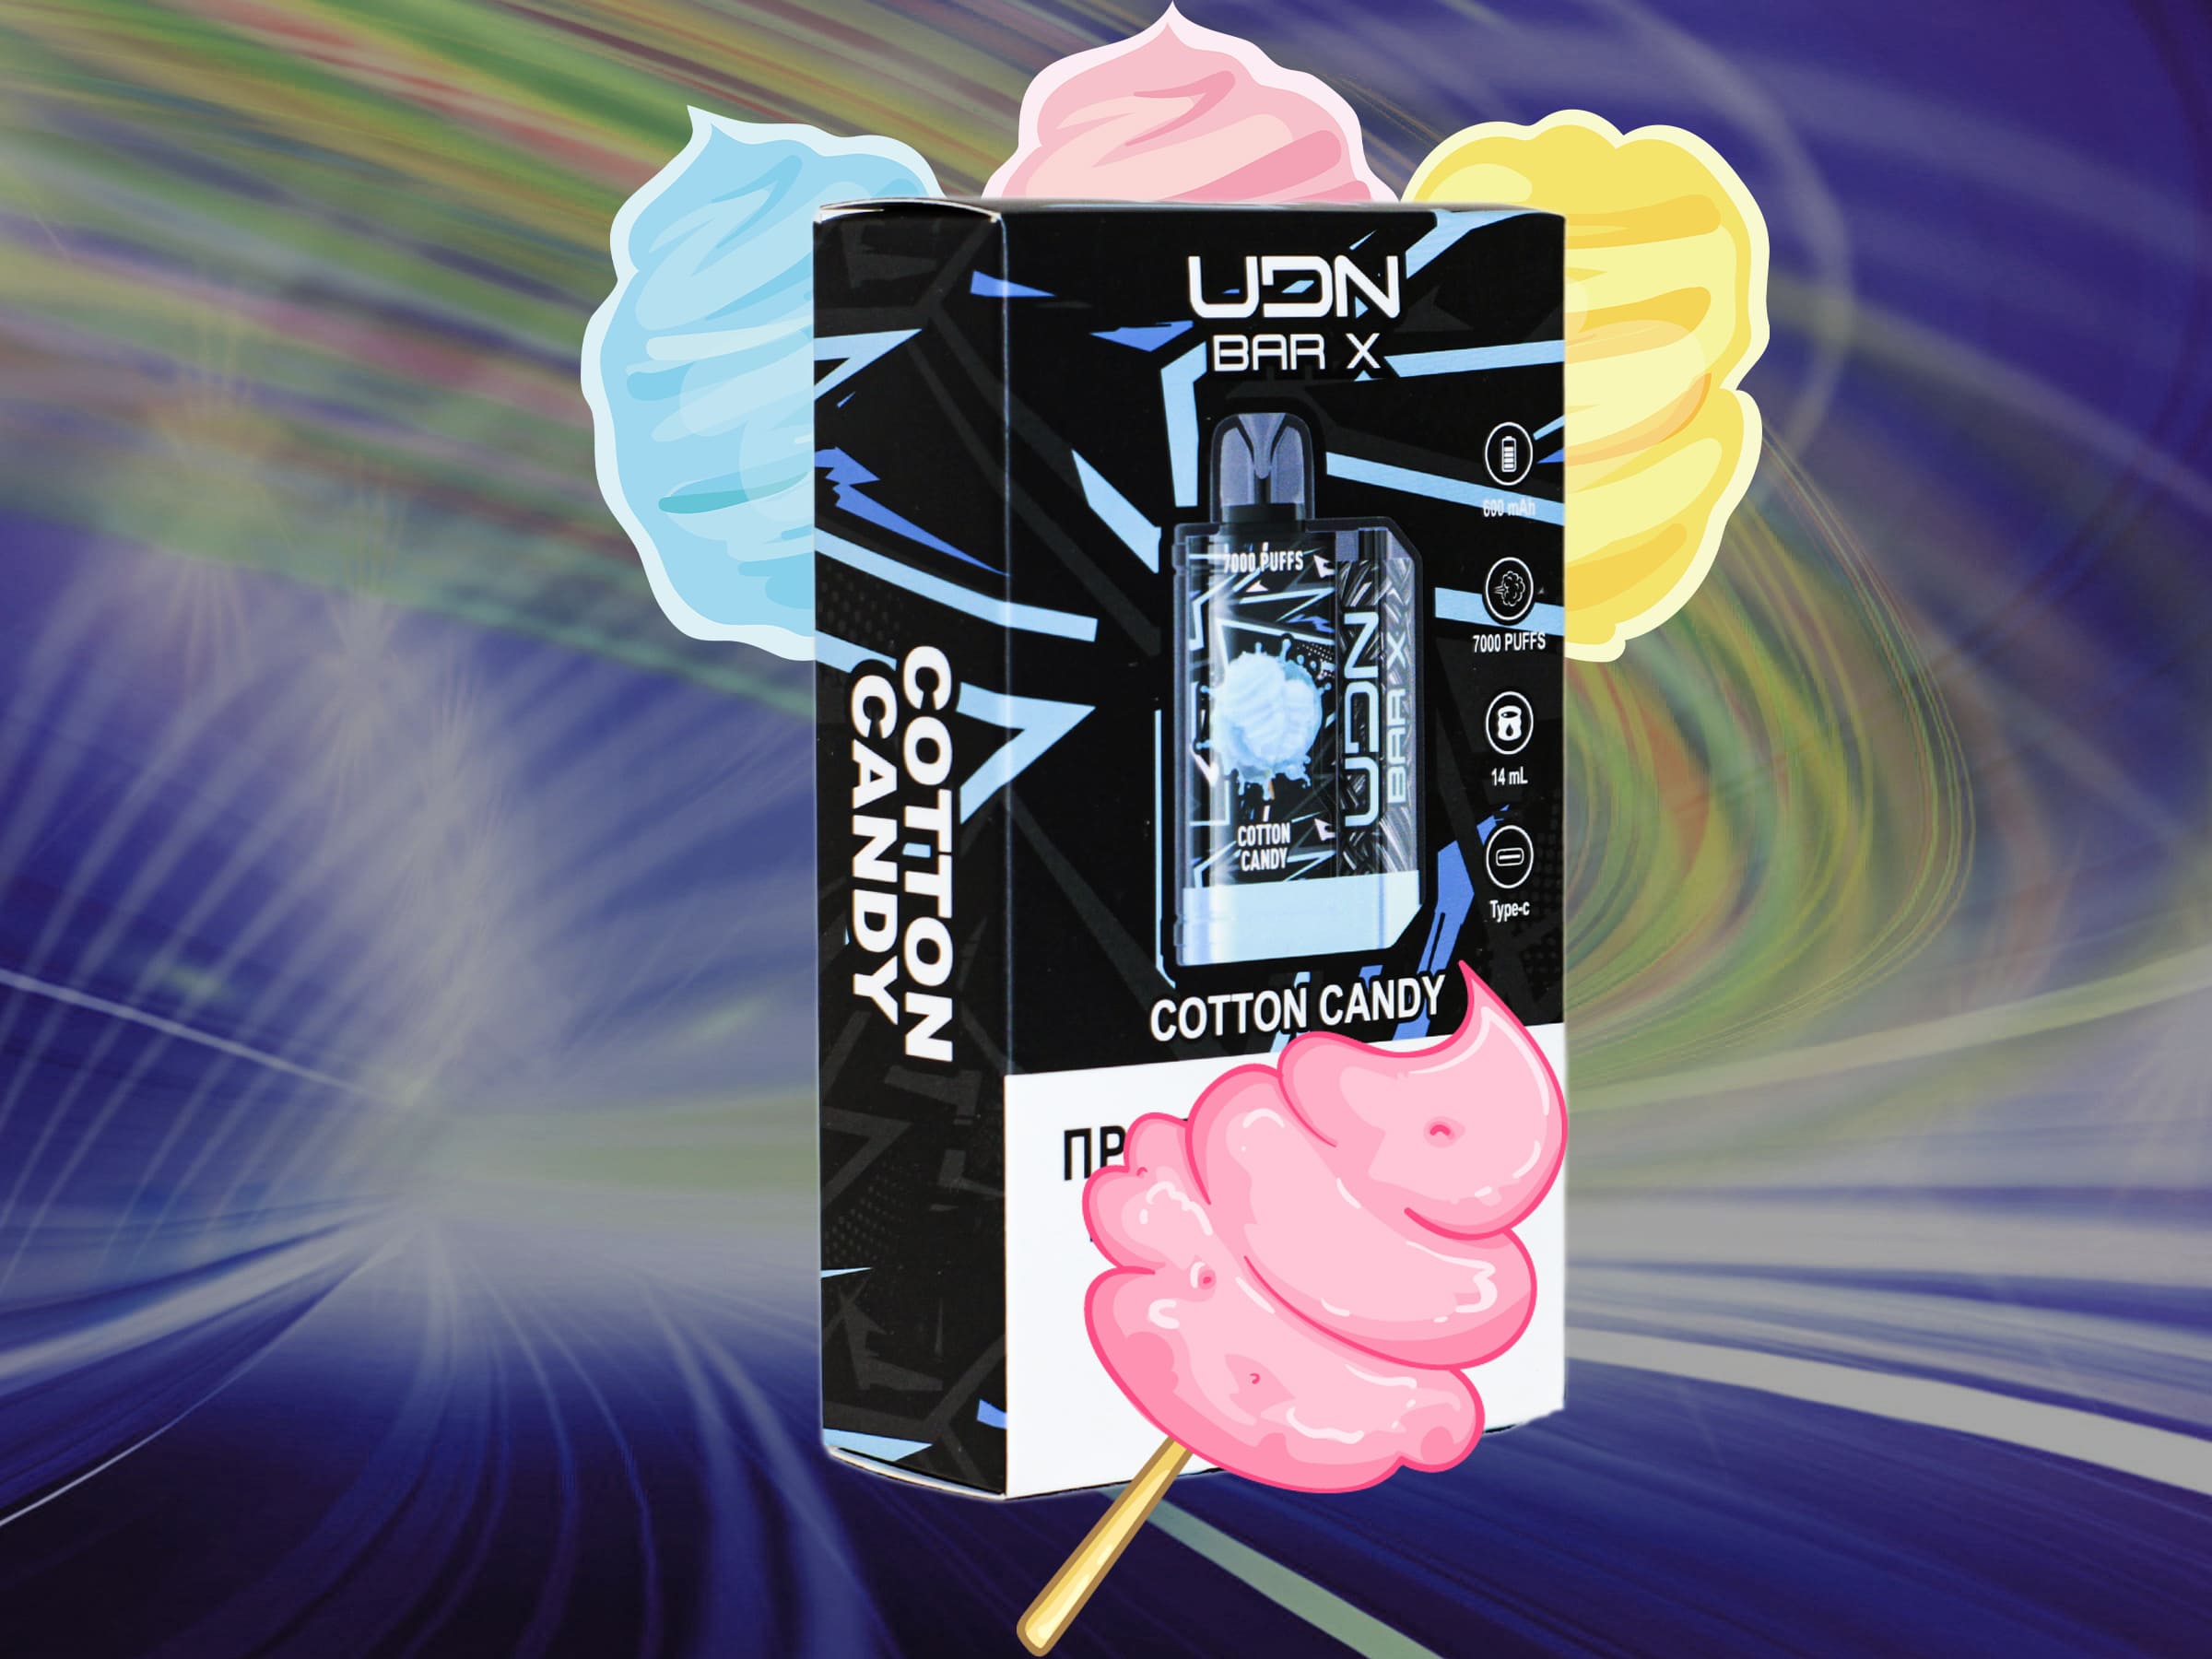 UDN X V3 7000 / Cotton Candy